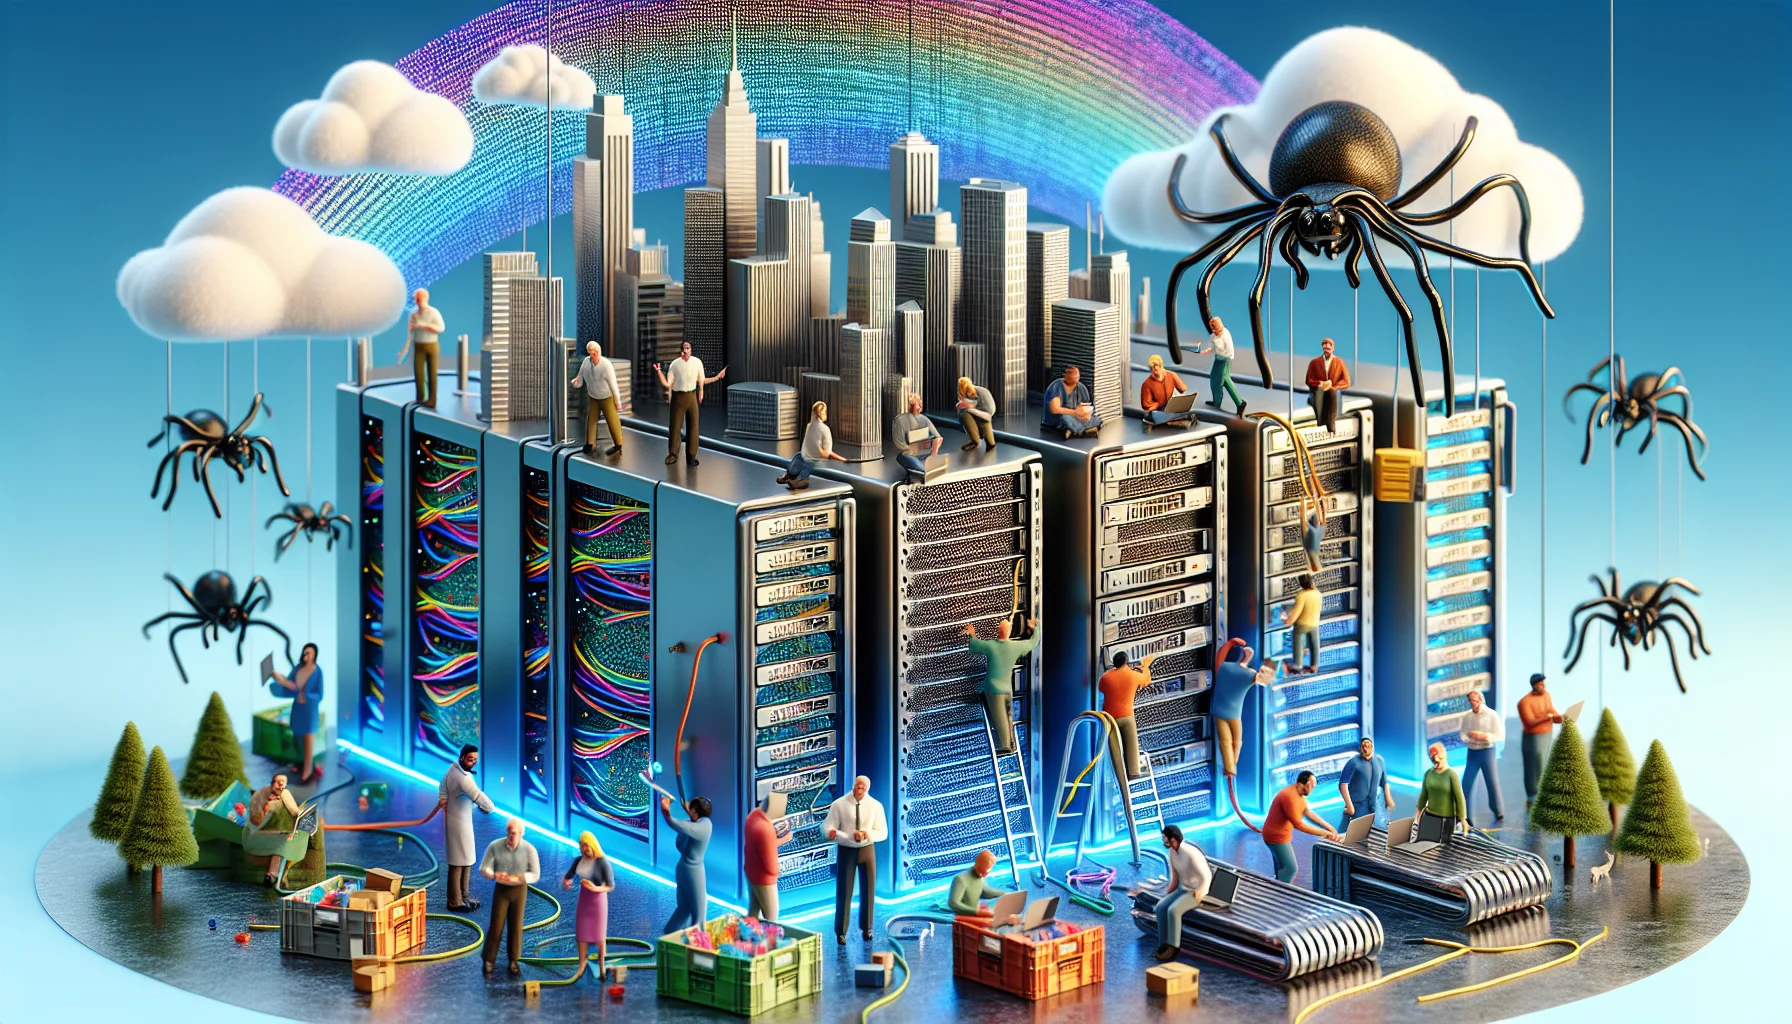 Generate an image showcasing a comedic scenario related to web hosting services. Picture this: A group of miniature people harmoniously working on a giant metallic server shaped like a cityscape. They are of diverse descents: Hispanic, Black, Middle-Eastern, and South Asian. Each one is engaged in a different activity, connecting cables, coding on floating holographic screens, or pacing on conveyor belts. Sky above them depicts a data stream instead of standard clouds creating a lively aurora. They are joyfully communicating with giant, friendly cartoonish spiders, representing 'web' in web hosting, helping them in their tasks. The image should be vibrant and enticing, aiming to provide a humorous and appealing representation of web hosting services.